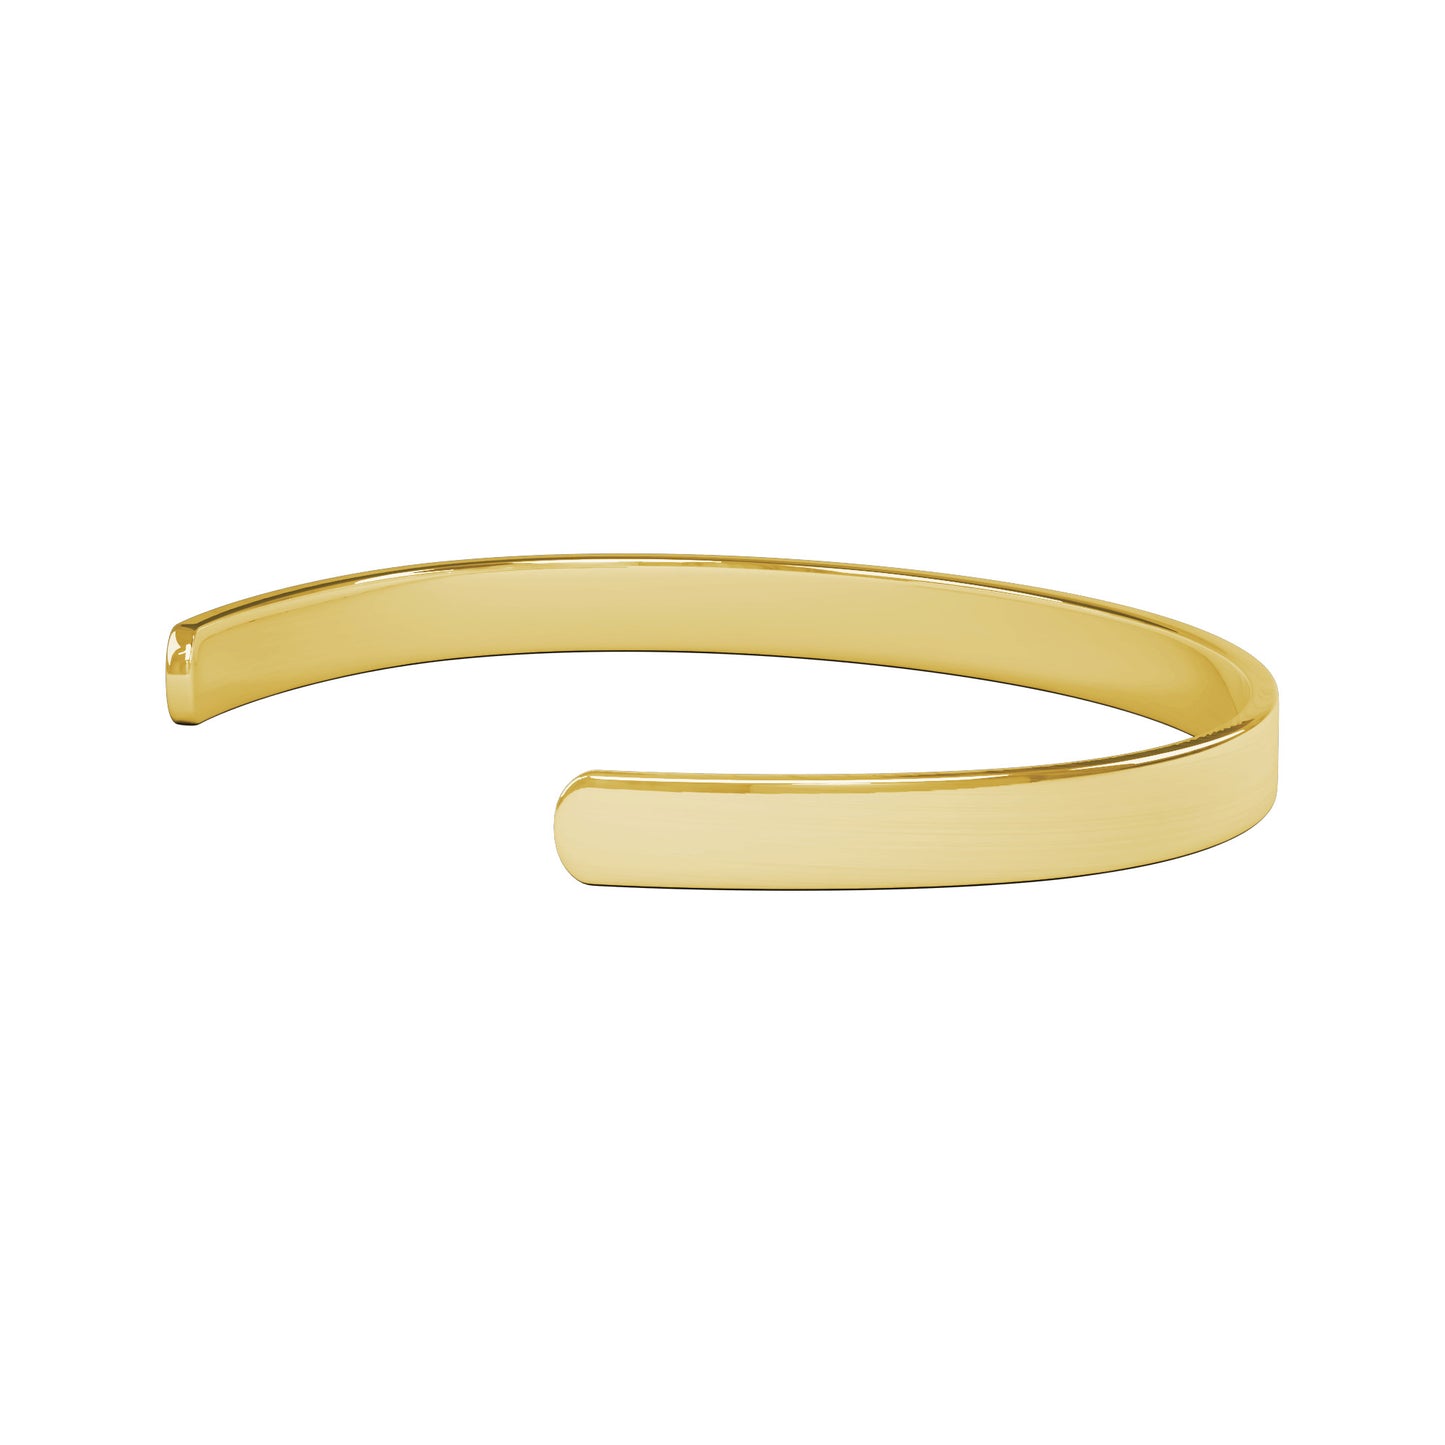 Practice Gratitude Cuff Bracelet, Gold, Rose Gold and Silver